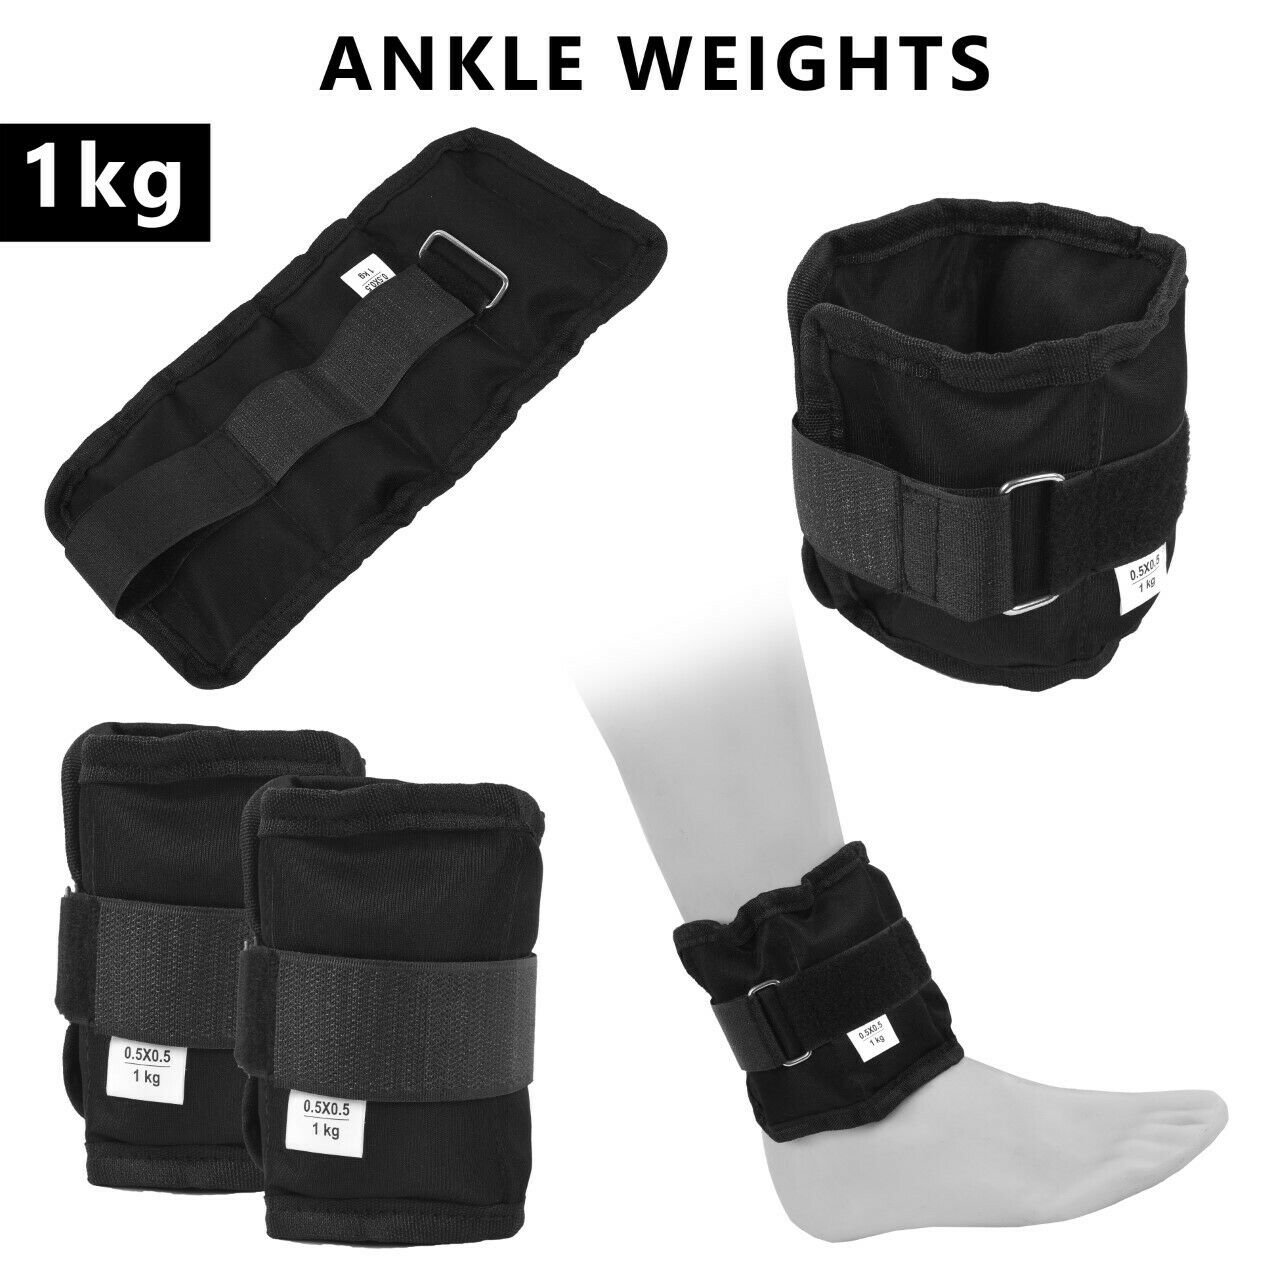 2fit™ Adjustable Ankle Weights Pair 1 Kg Wrist Arm Leg Running Exercises - Pair